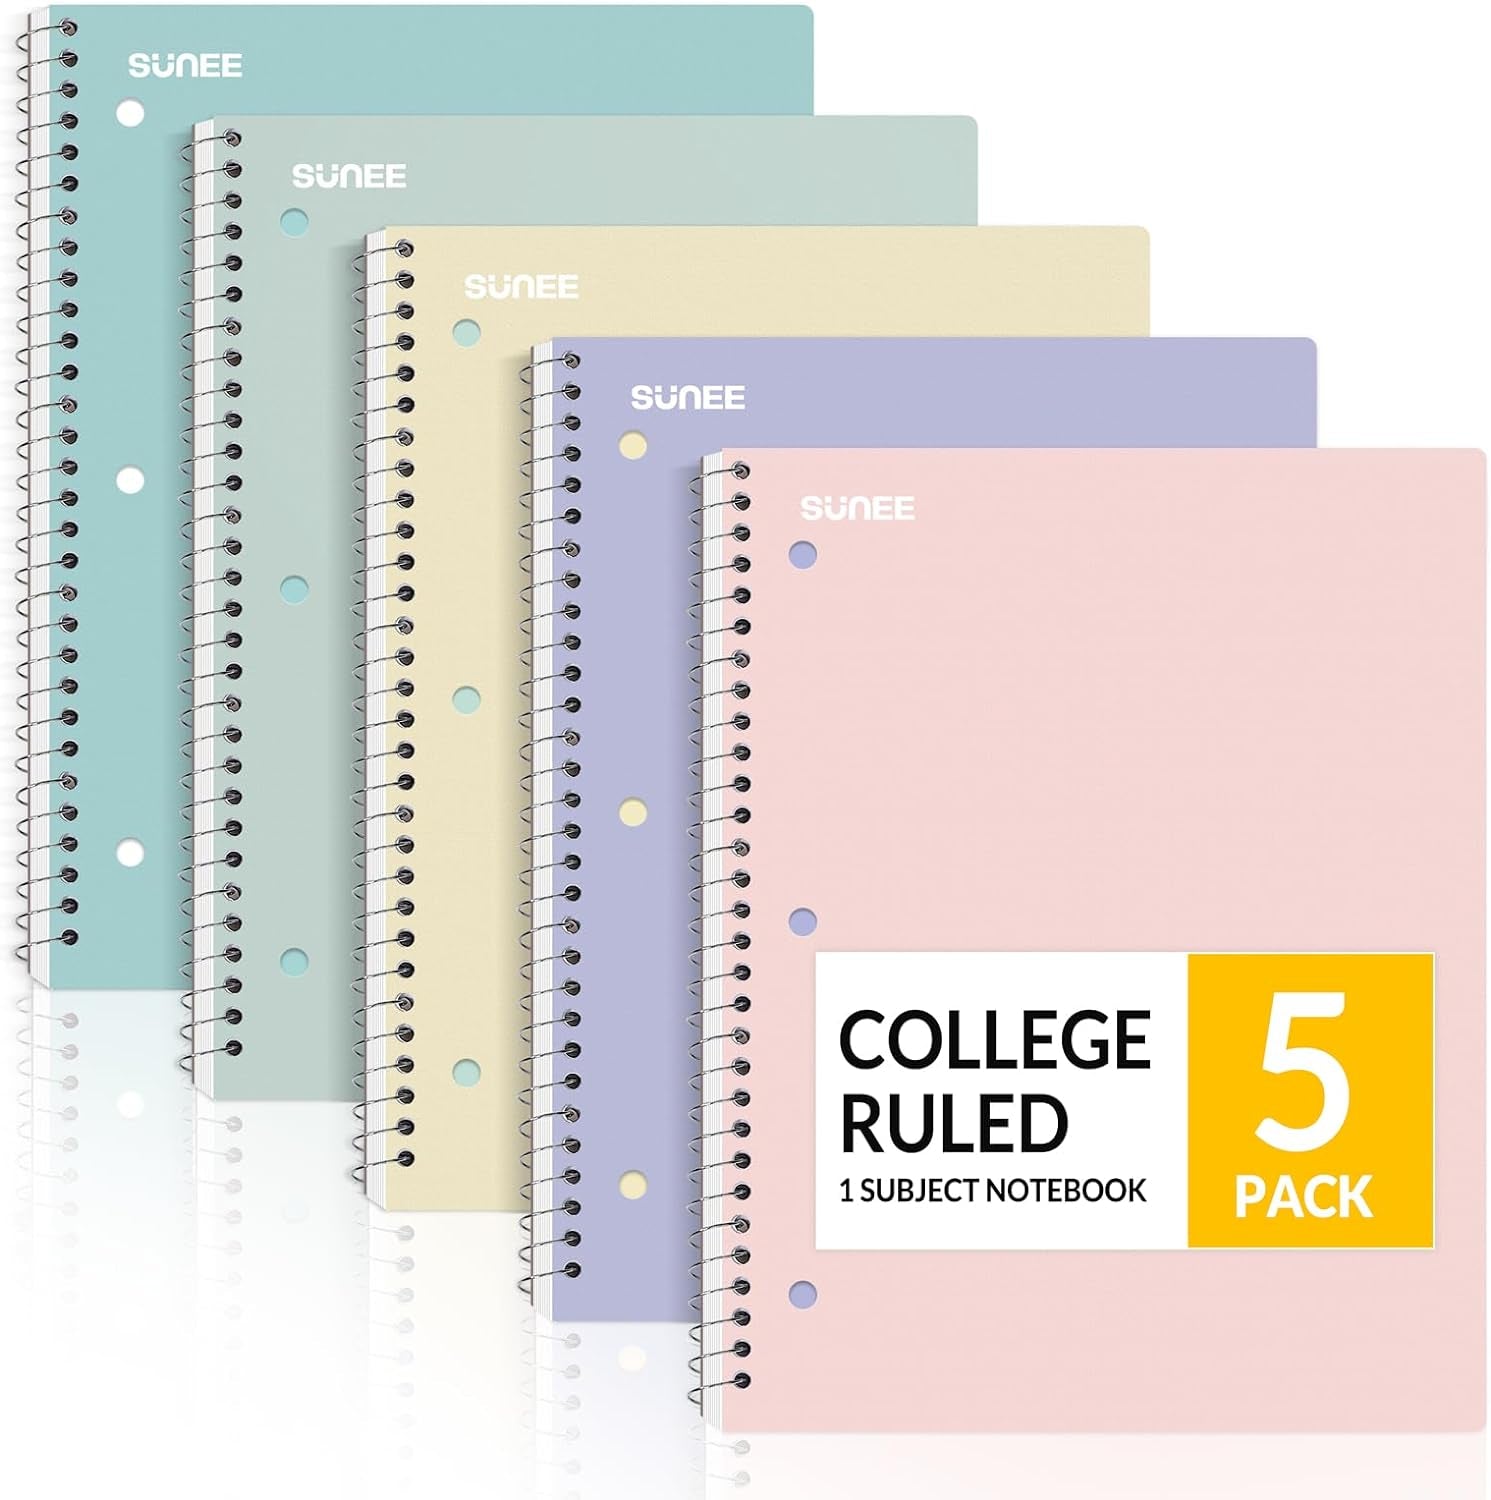 Spiral Notebooks, 1-Subject, 10 Pack, College Ruled Paper, 8" X 10-1/2", 70 Sheets per Notebook,3-Hole Punched Paper, Pink,Purple, Blue, Green, Yellow Spiral Lined Notebooks for School,Work